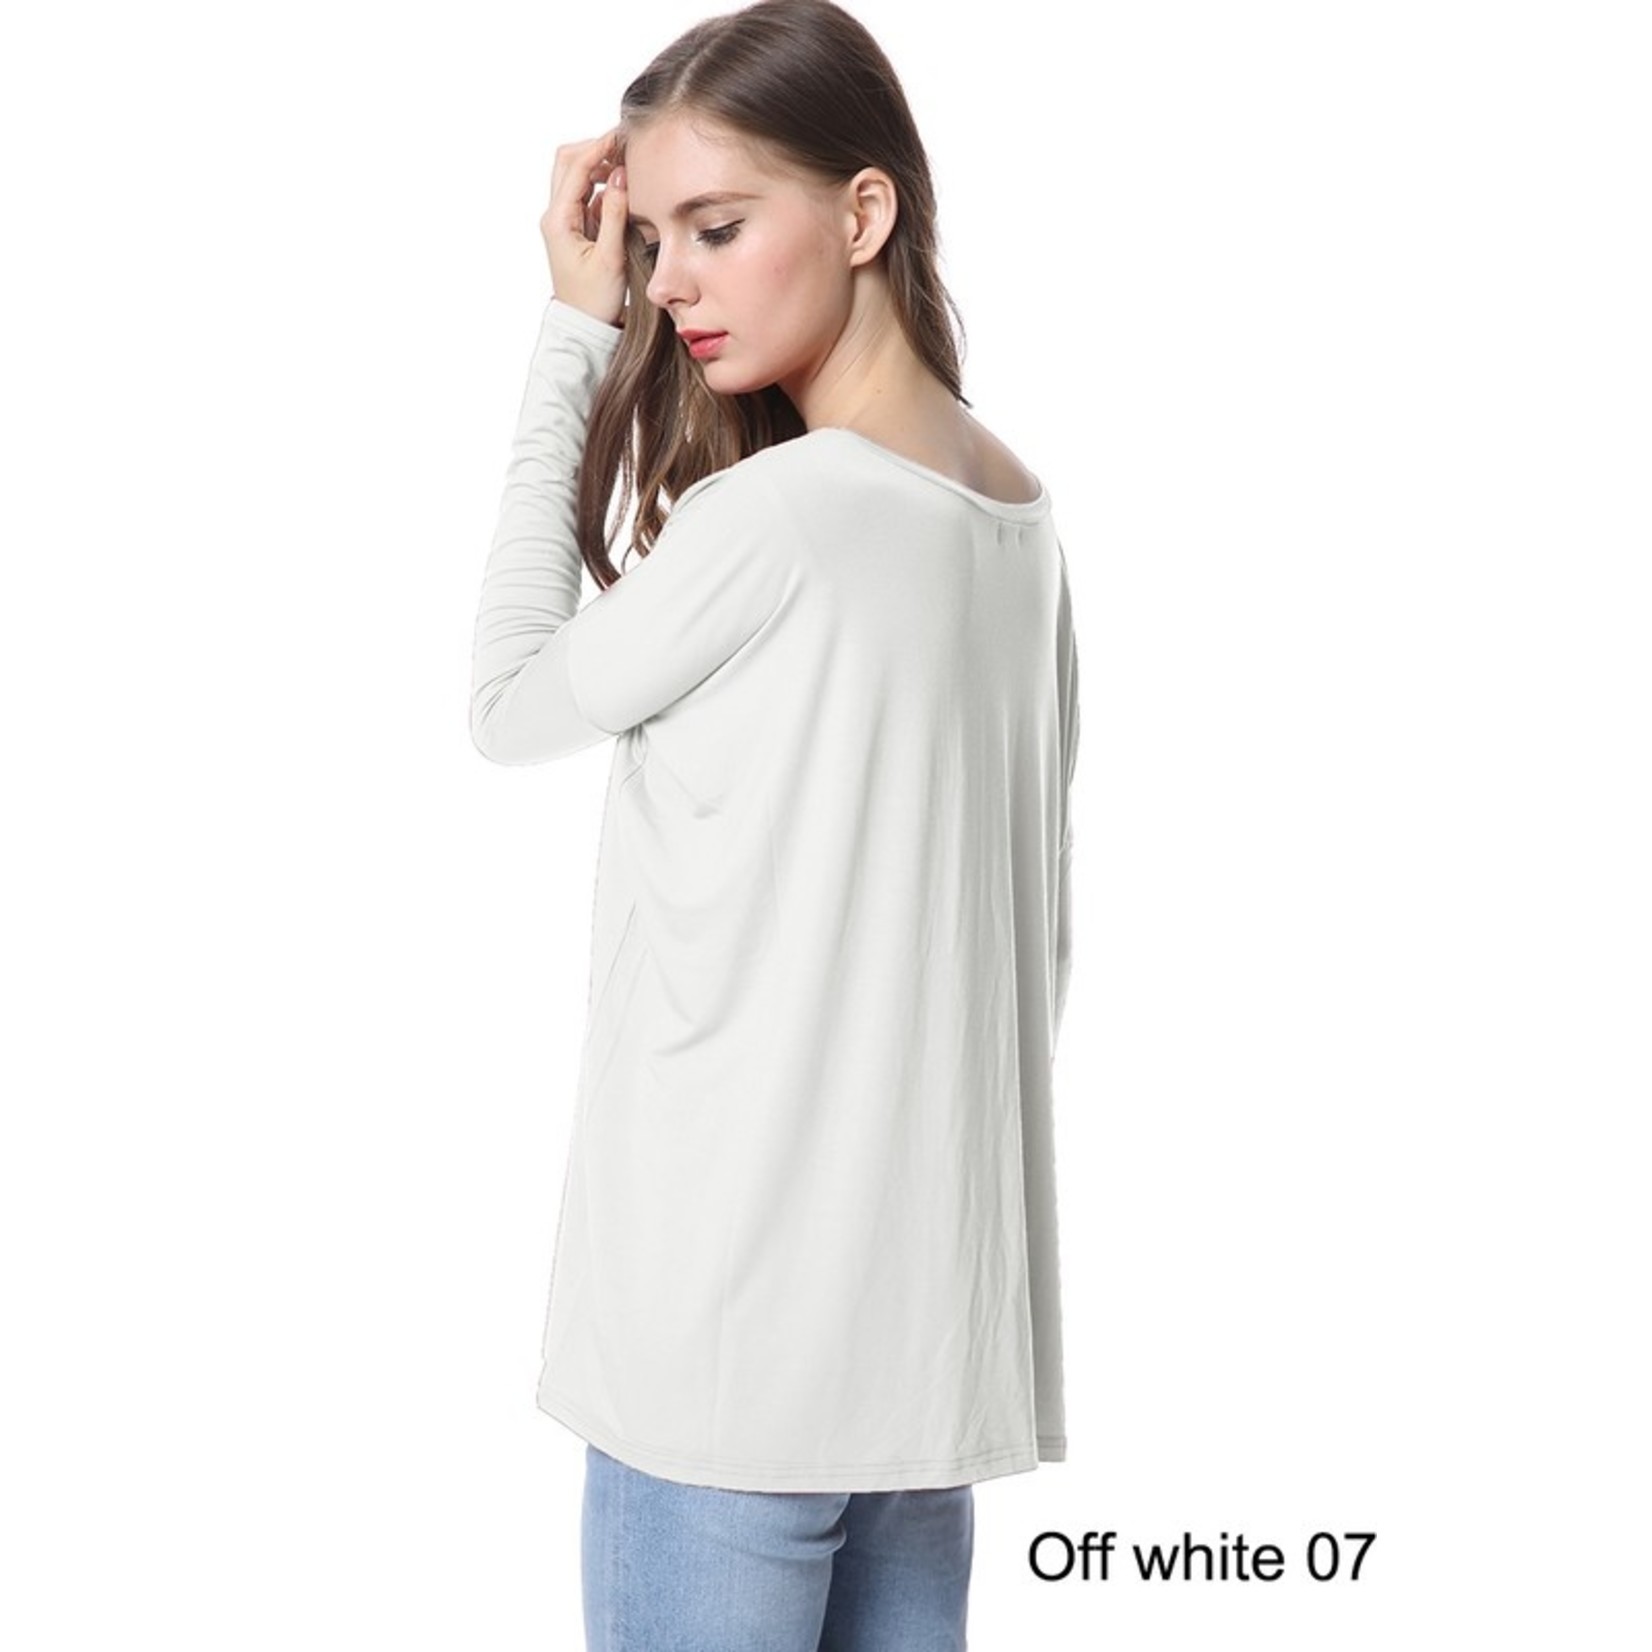 The Go To Long Sleeve V-Neck Top